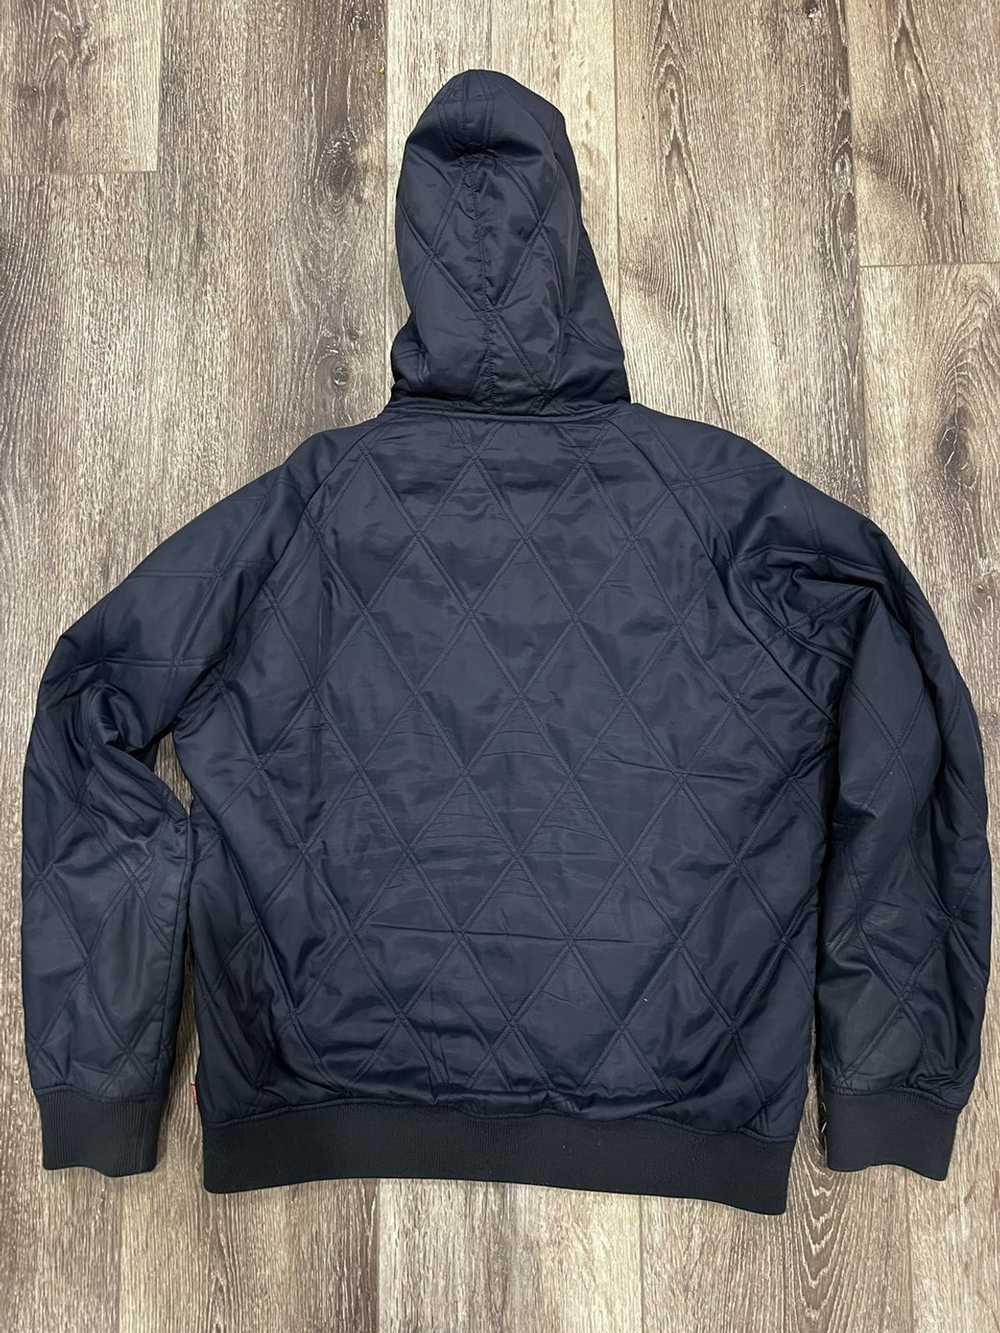 Supreme Quilted Zip-up Hooded Jacket - image 2